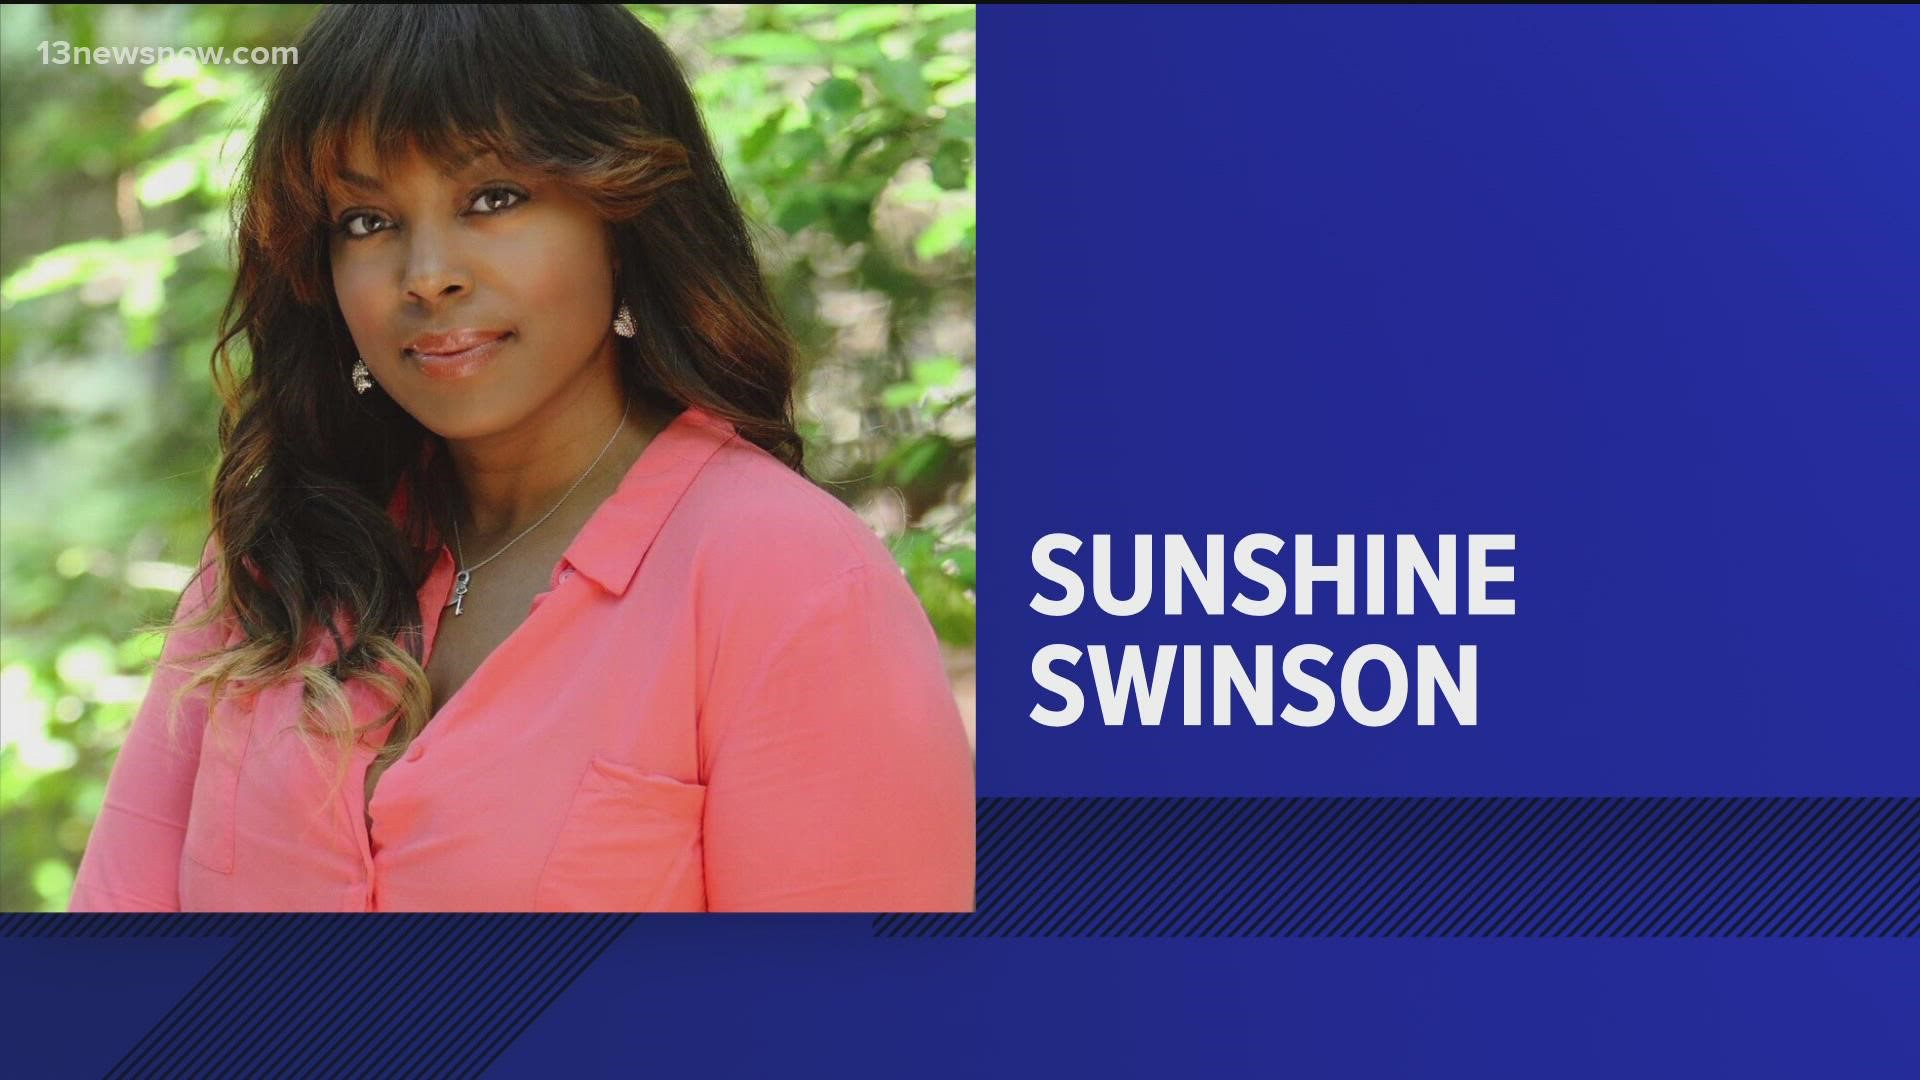 Sunshine Swinson was hired just last month. While the details surrounding her departure are limited, a spokesperson said it involved a "personnel matter."